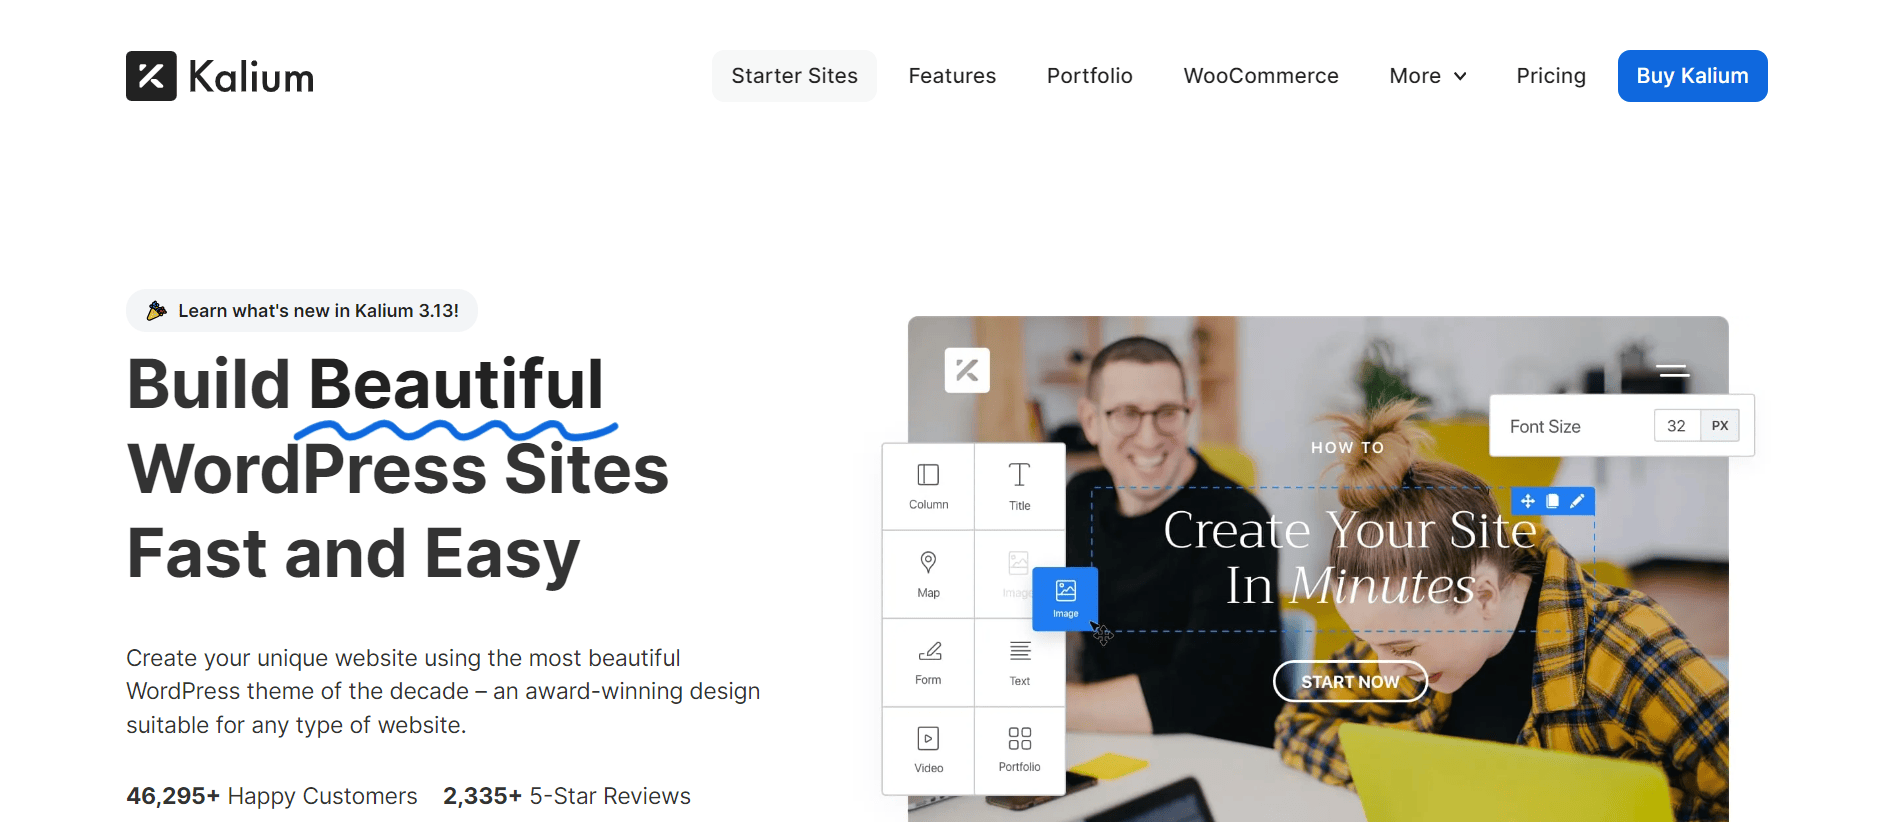 Kalium theme's website header featuring the slogan 'Build Beautiful WordPress Sites Fast and Easy' with images of the page builder and a cheerful man using a laptop.